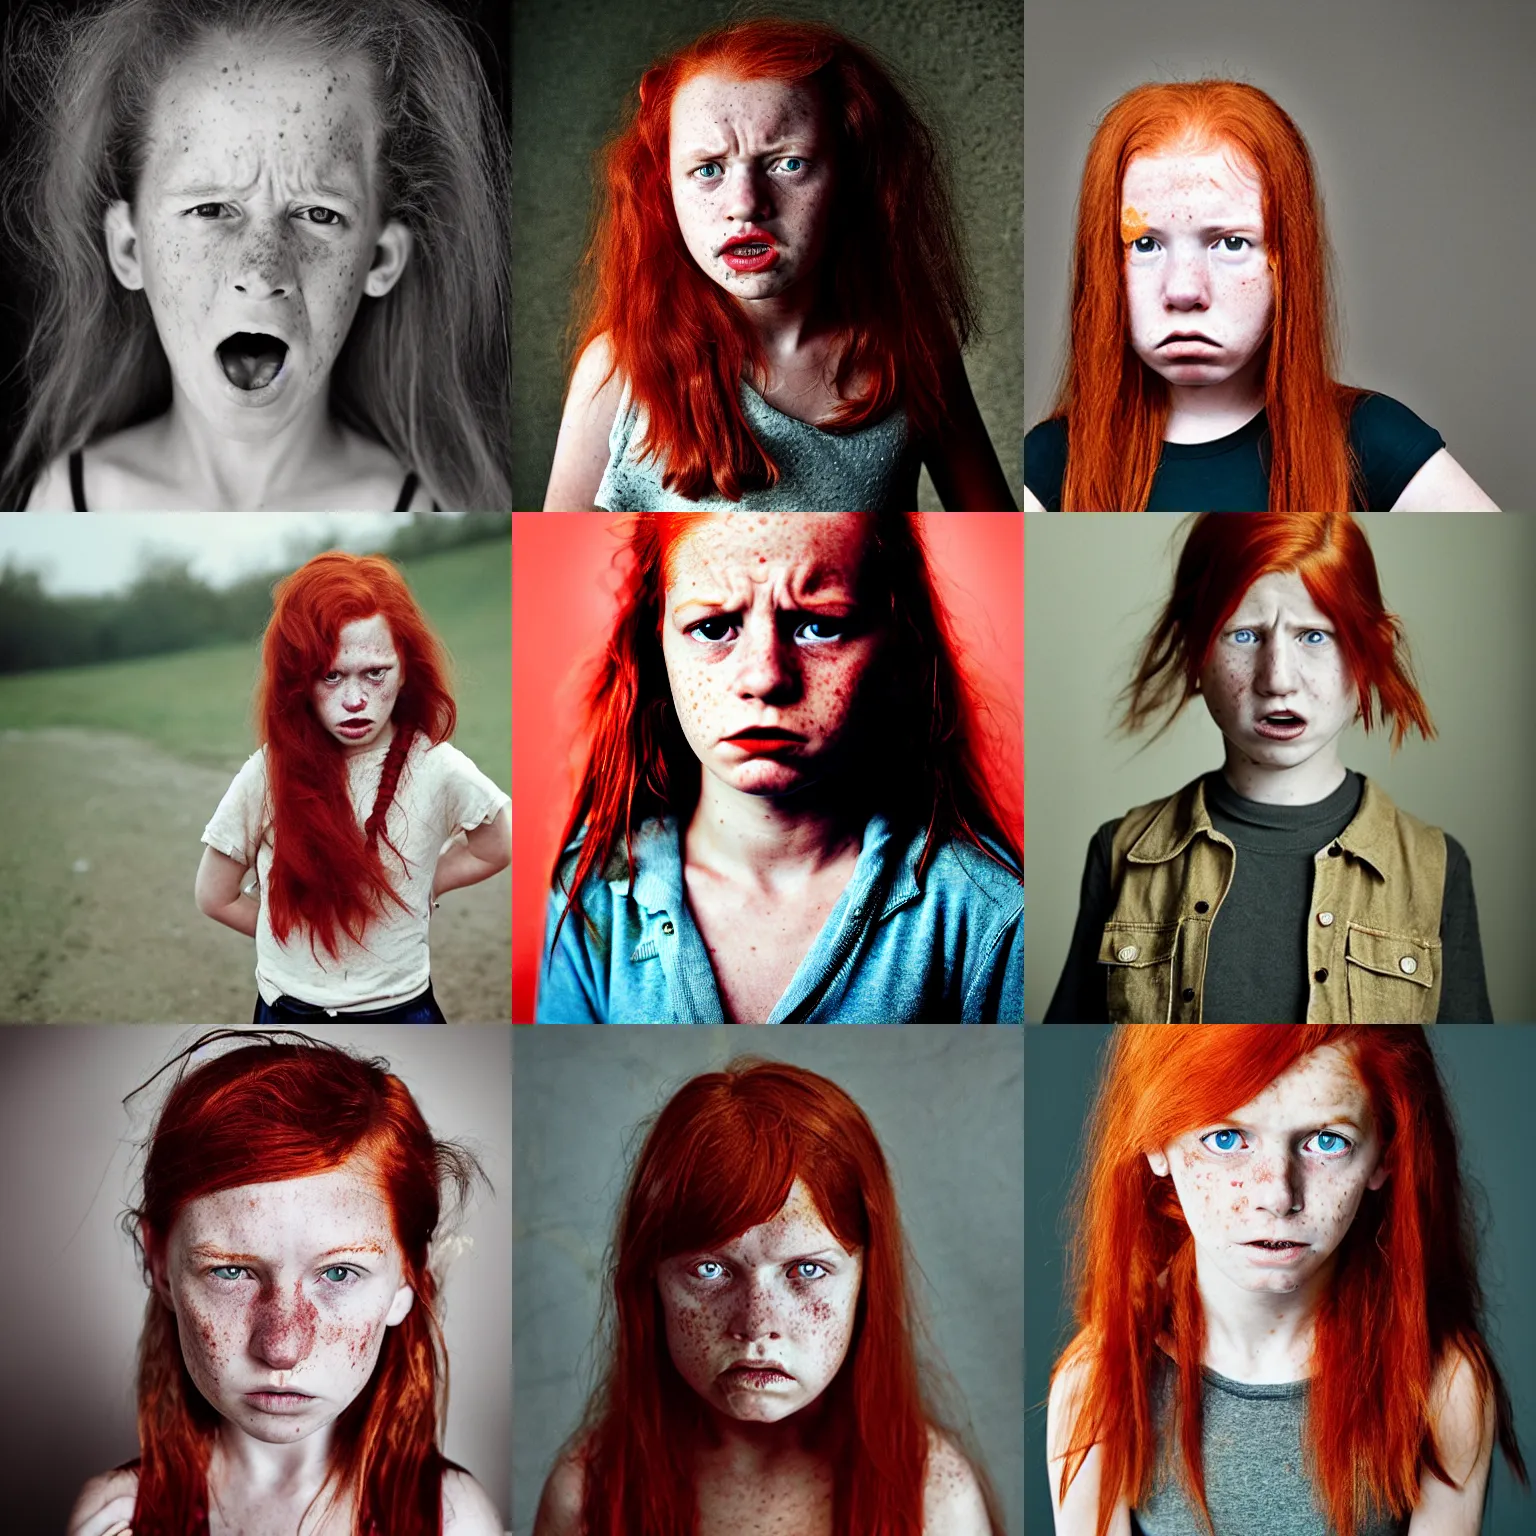 Prompt: photo of an angry ten year old girl by annie leibovitz, red hair, freckles